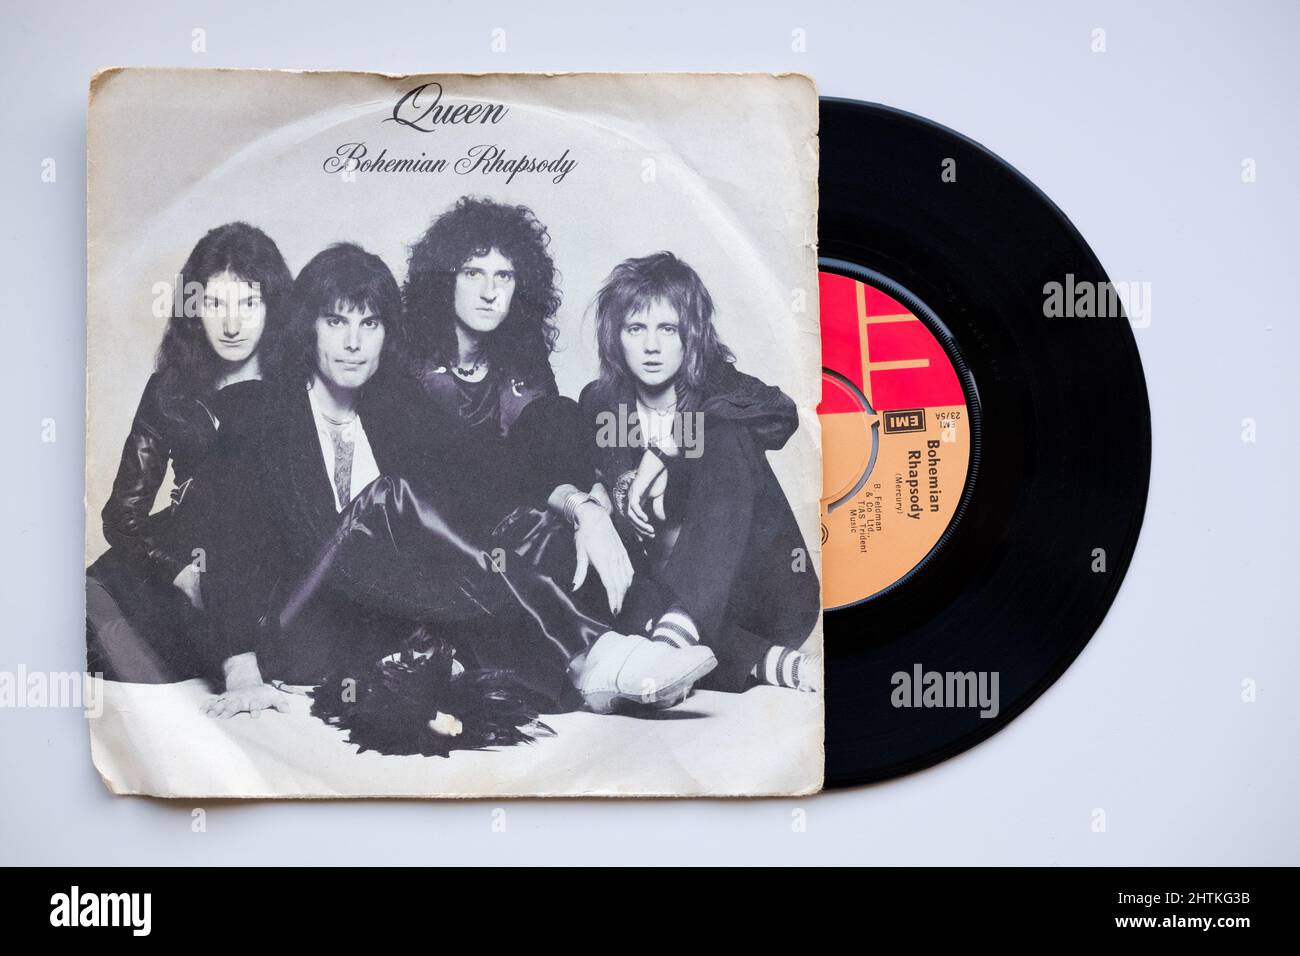 An image of the original 1975 vinyl 45rpm single release of Bohemian Rhapsody by the group Queen. The record is shown in its original picture sleeve Stock Photo